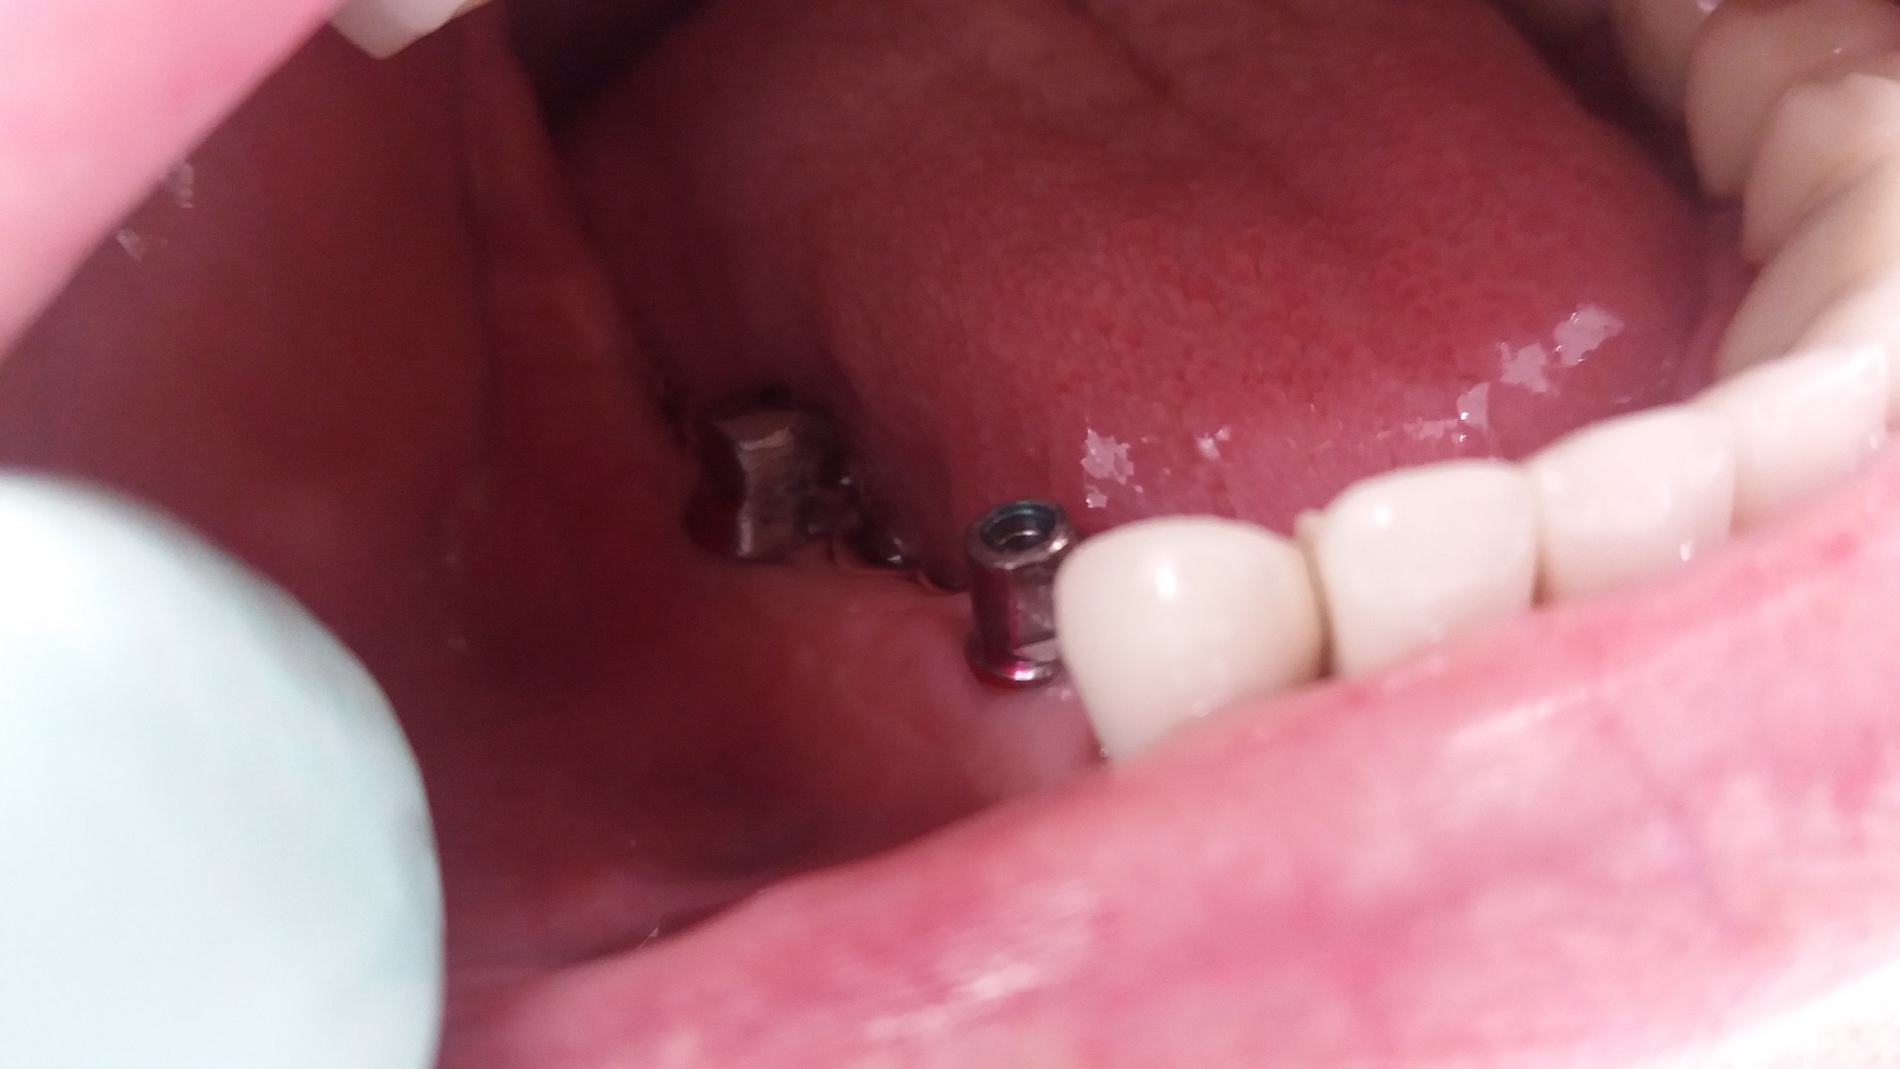 patient no.2: Lateral bridge of 4 members on 2 implants-Before